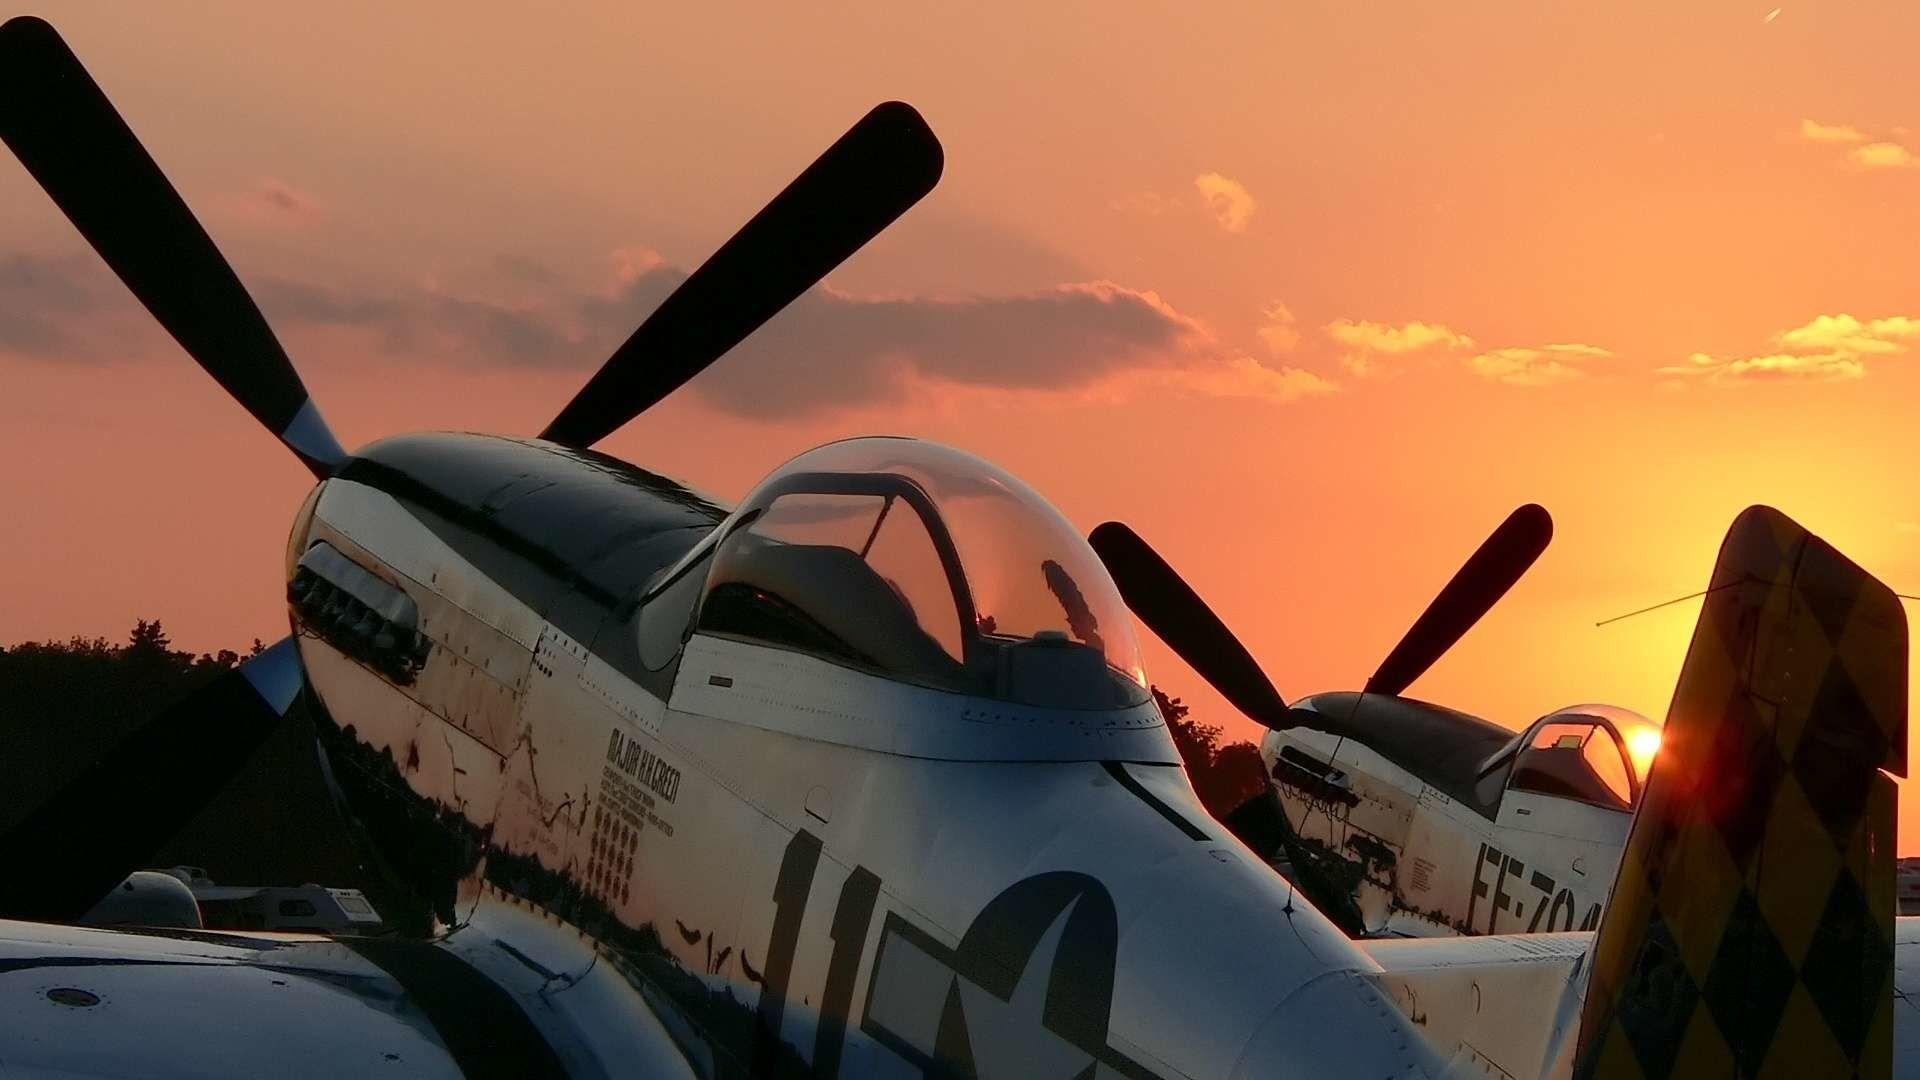 P 51 Mustang Wallpaper (the best image in 2018)